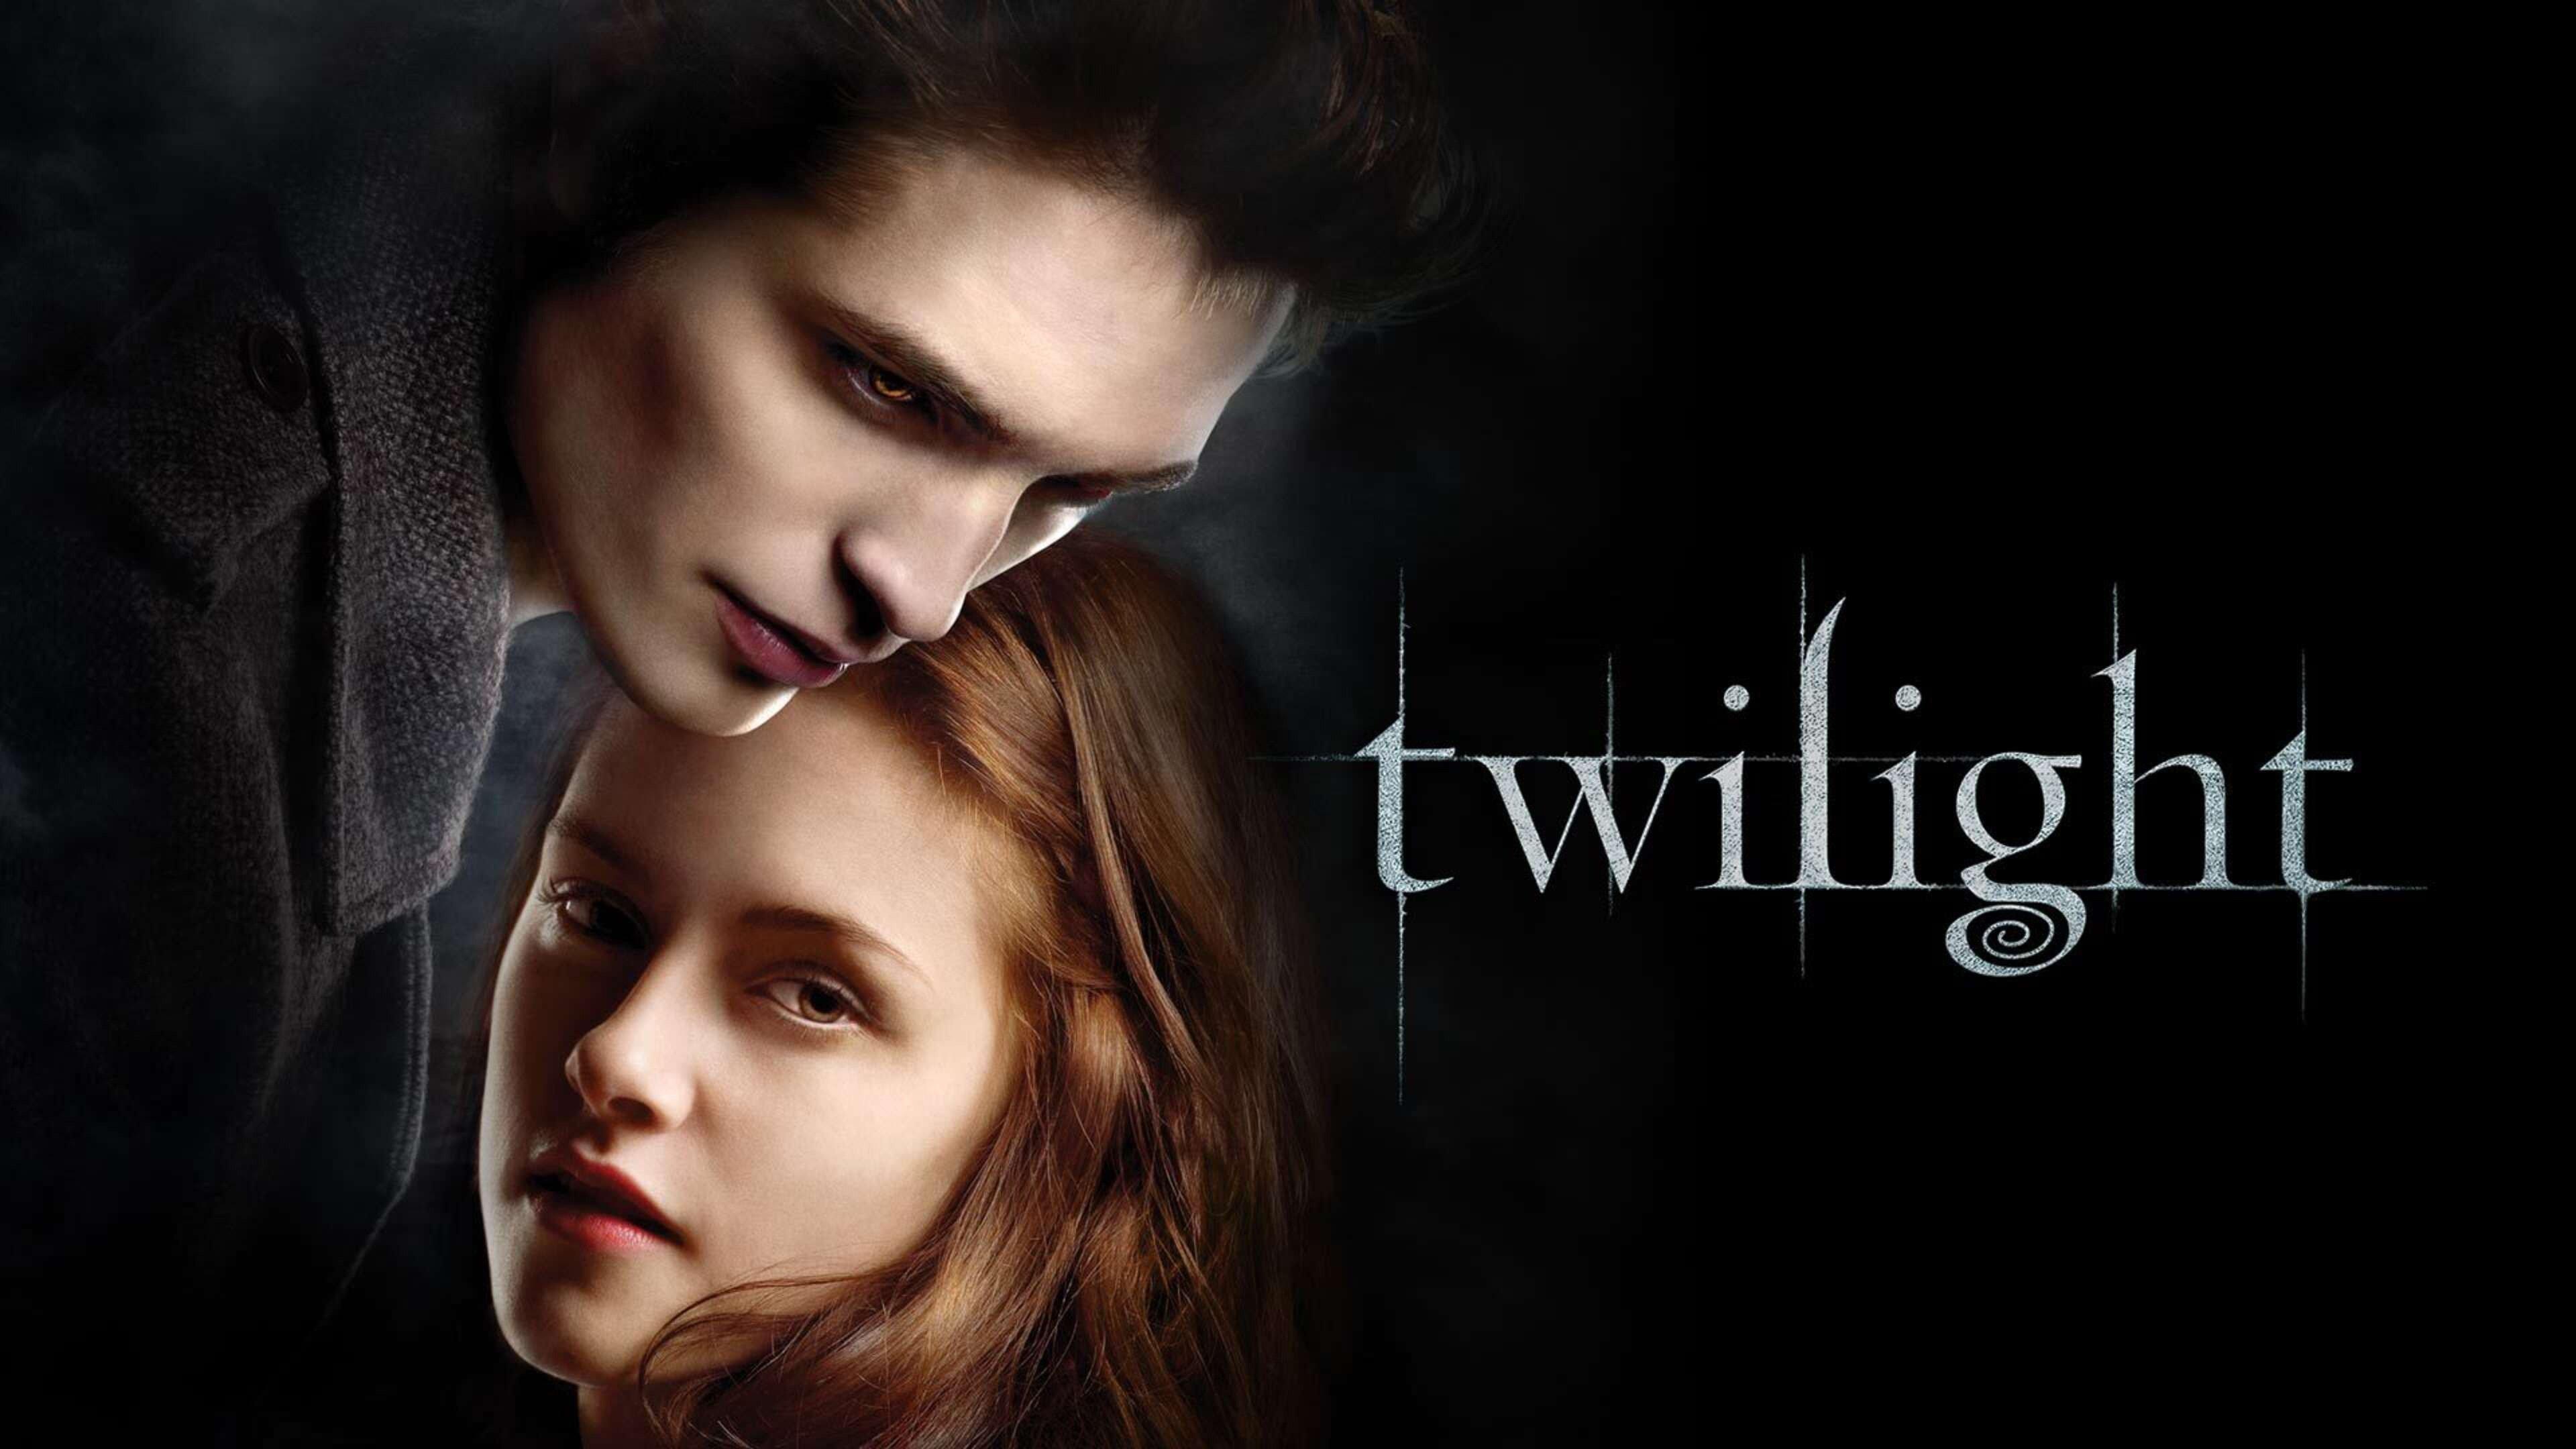 Twilight Streaming Online on Philo (Free Trial)